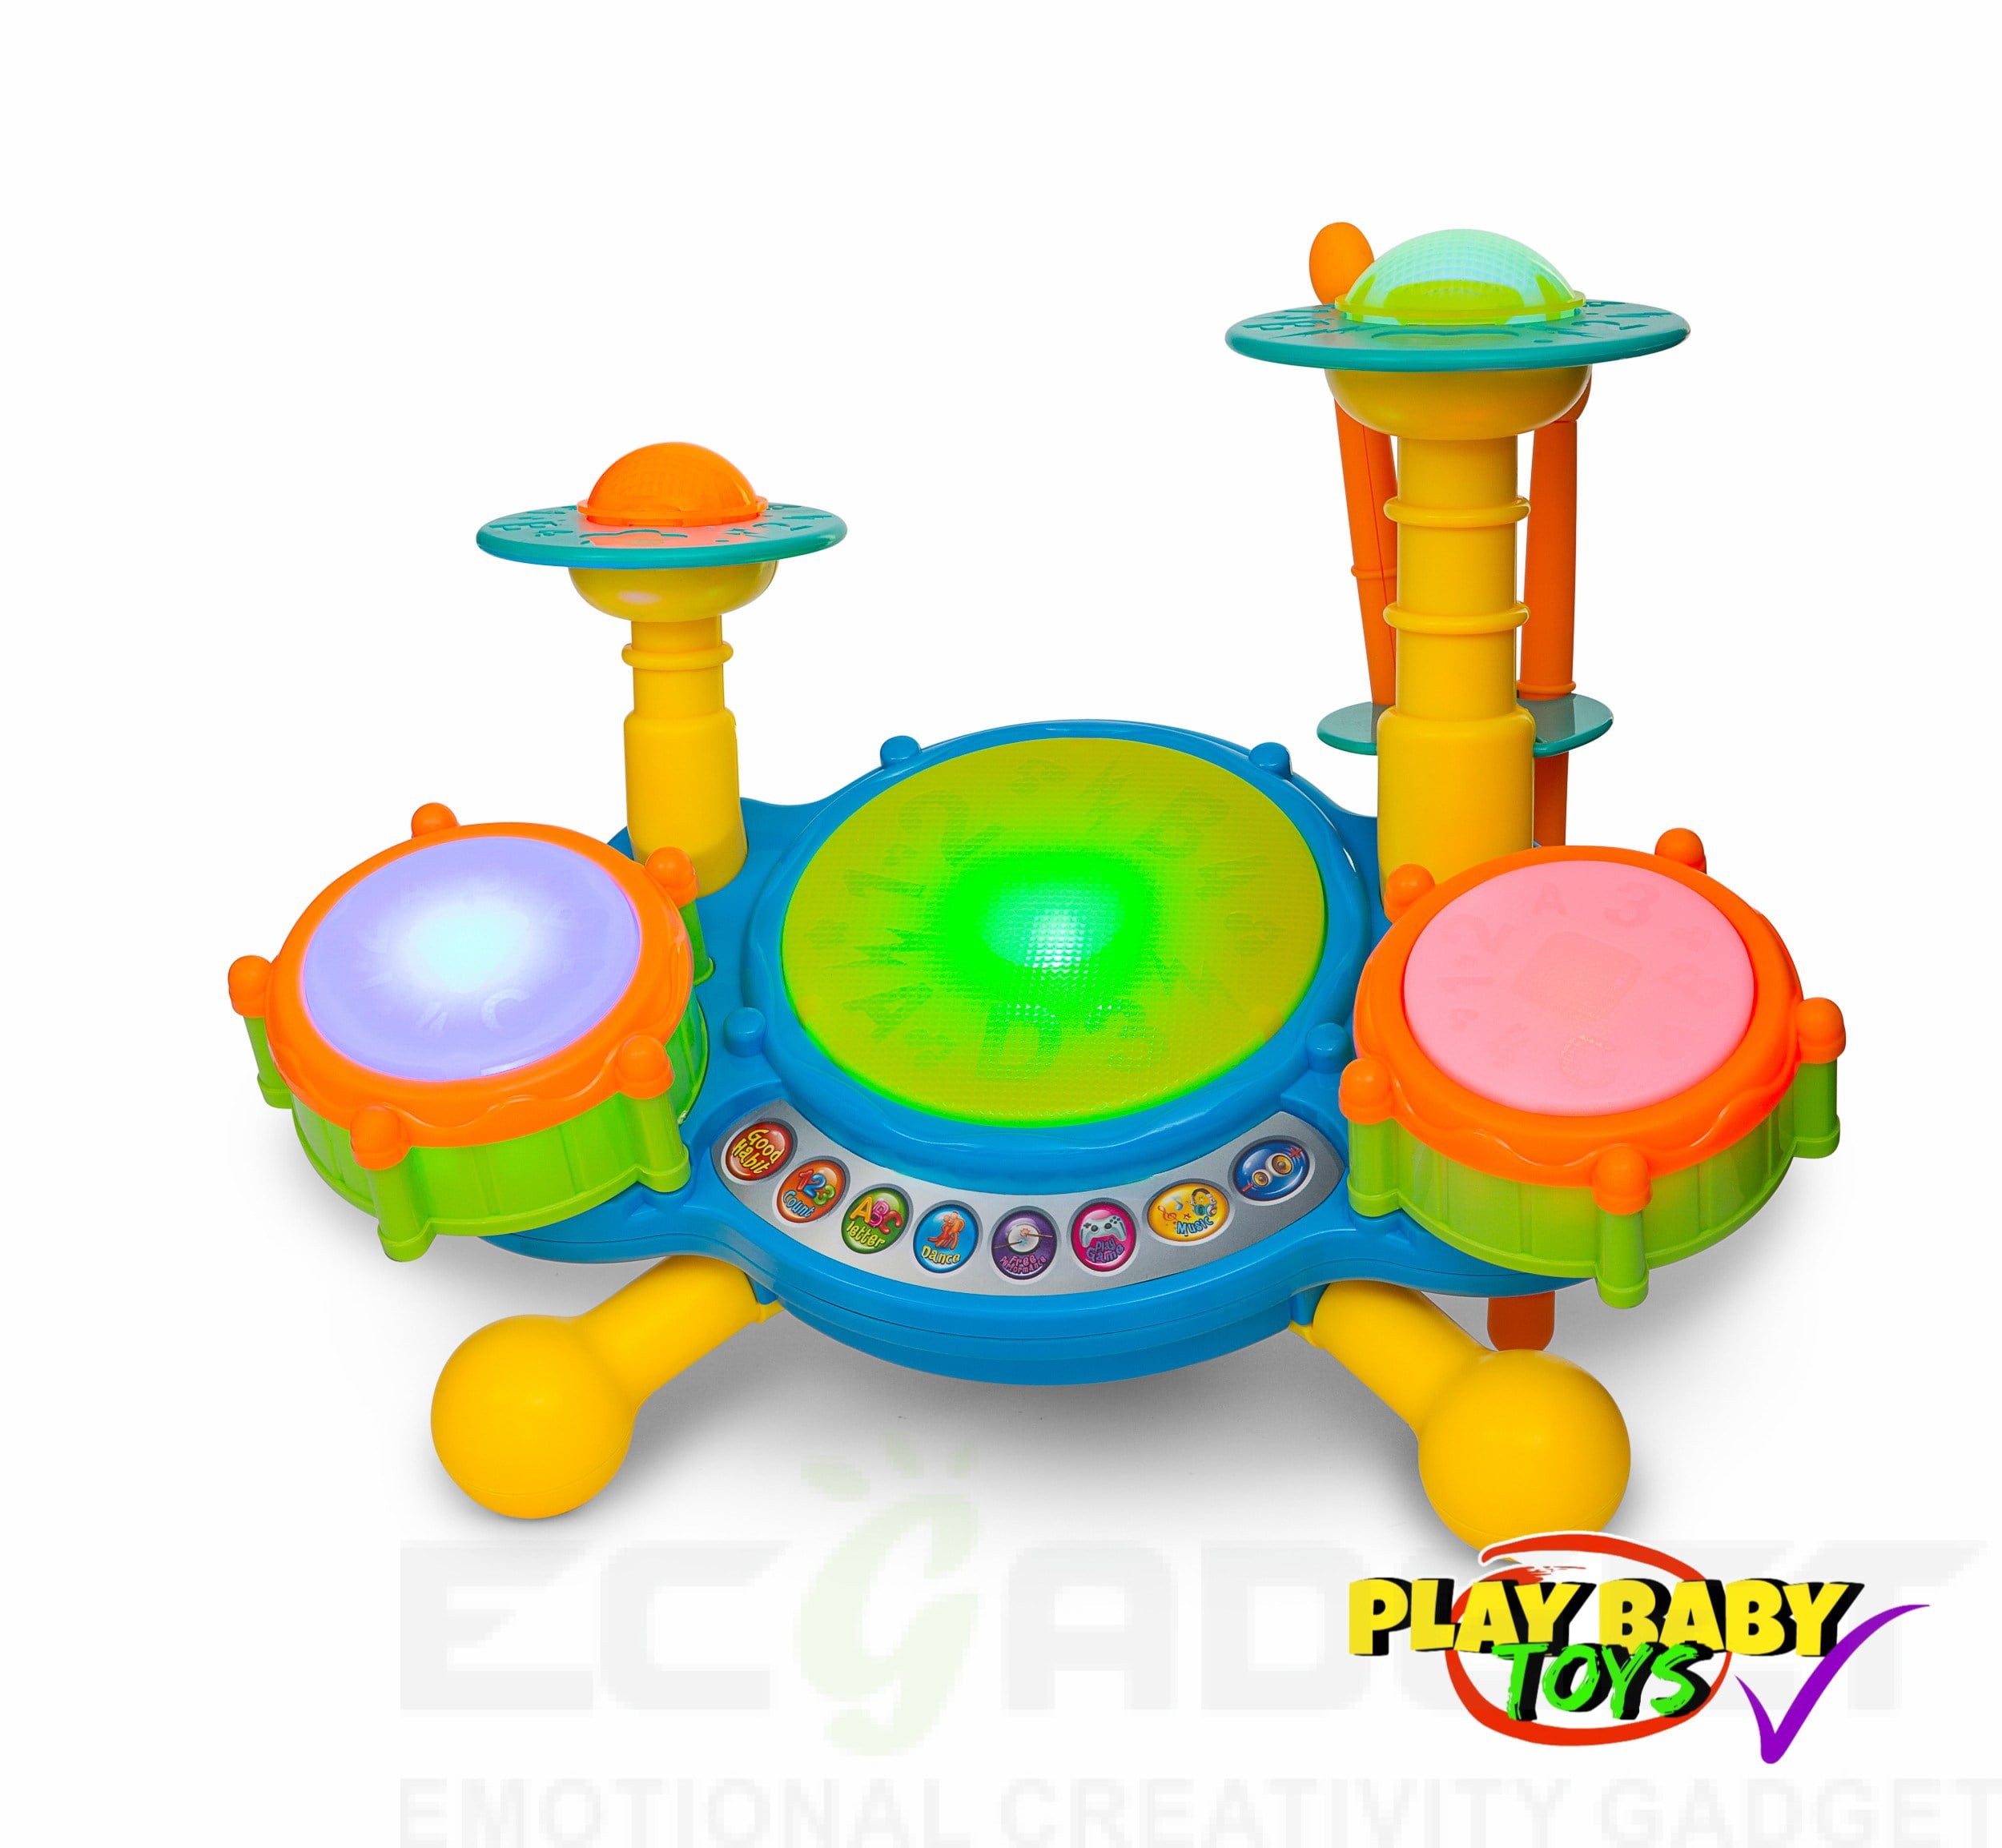 Play Baby Toys Big Beats Pre-School Set With Preloaded Songs And Music With Educational Activities Like Counting And Developing A Sense Music - Walmart.com